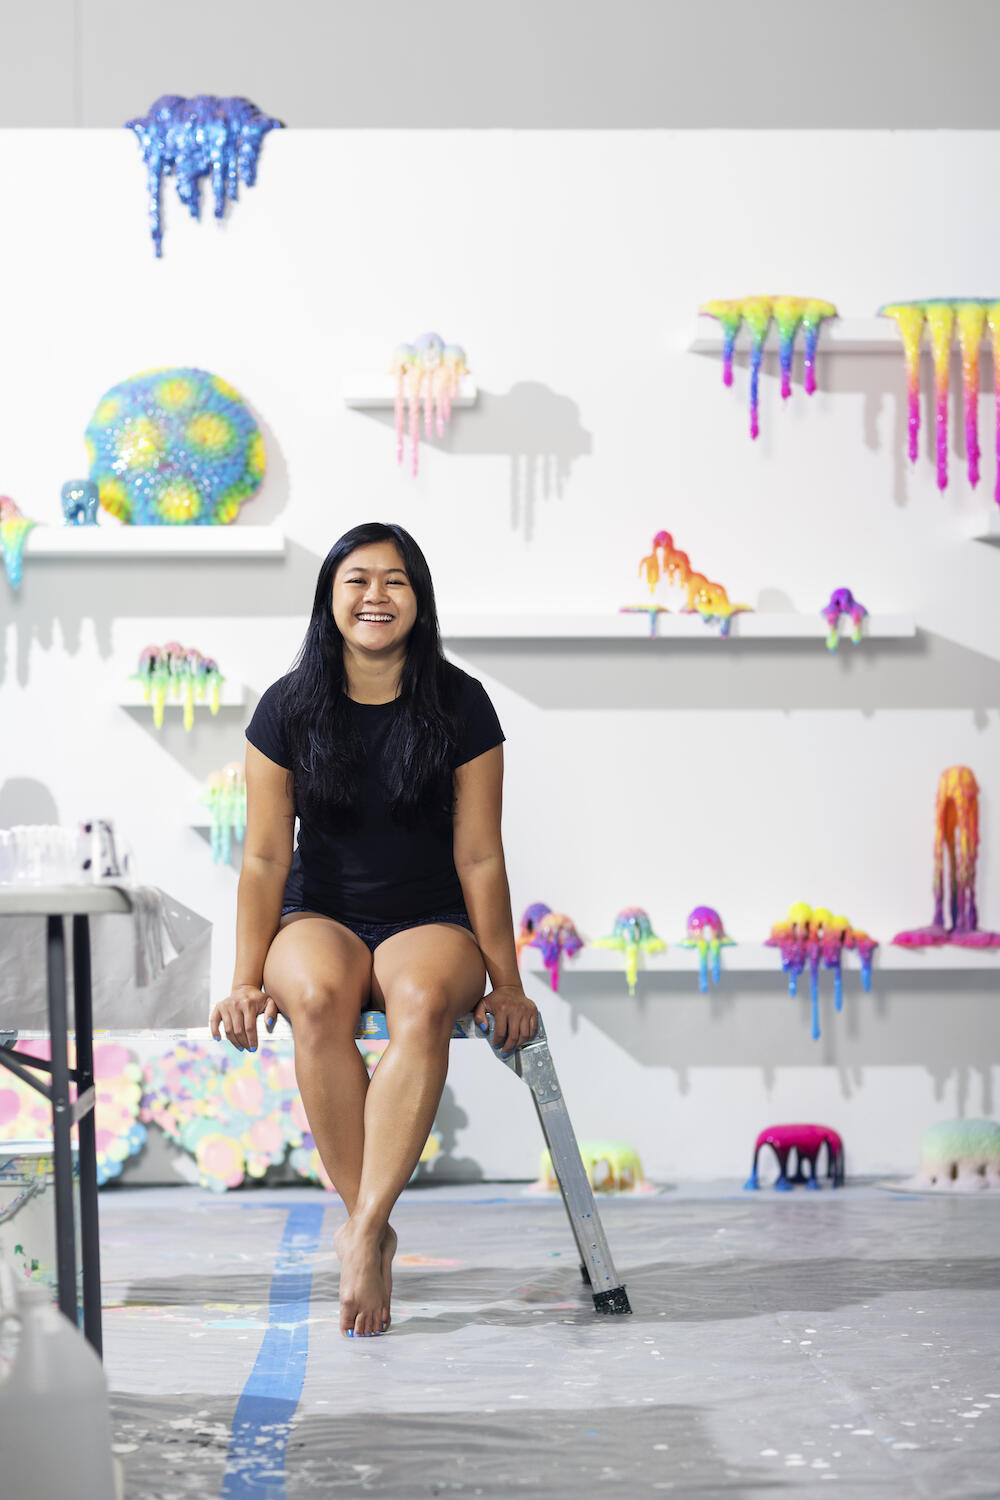 Dan Lam’s psychedelic confections use color theory to convey emotion